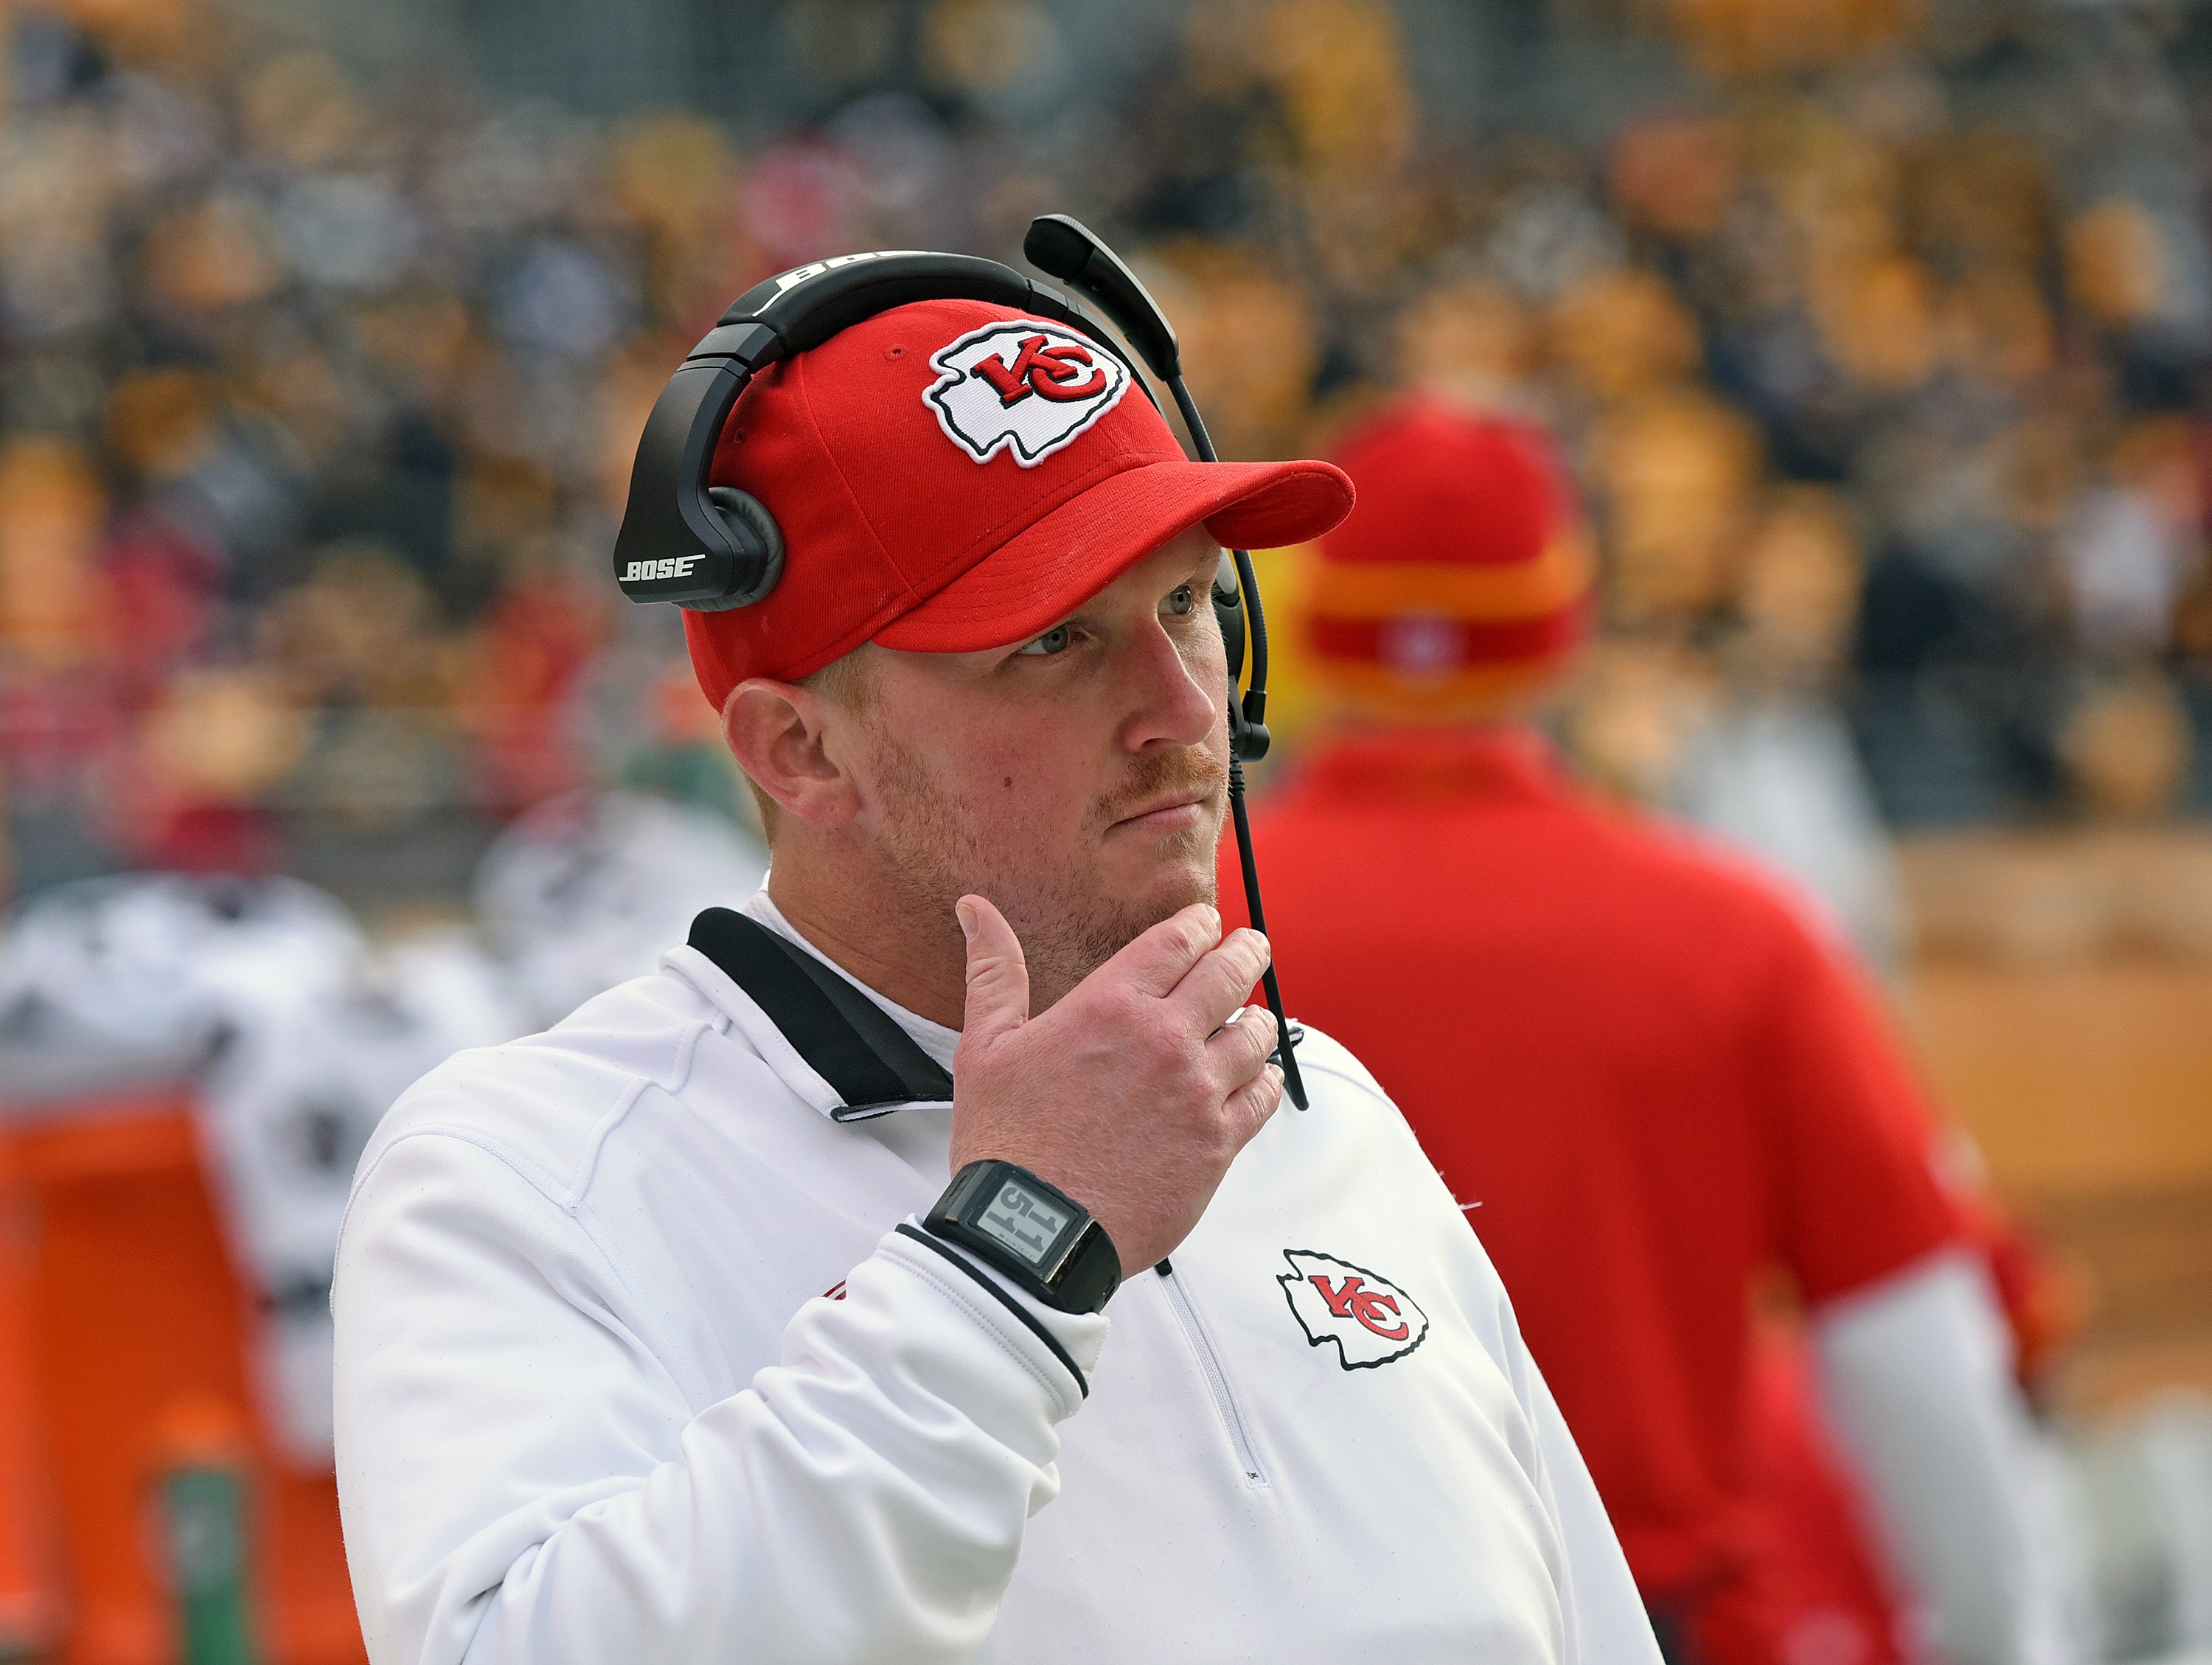 Quality control coach Britt Reid of the Kansas City Chiefs at Heinz Field on December 21, 2014 | Photo: Getty Images